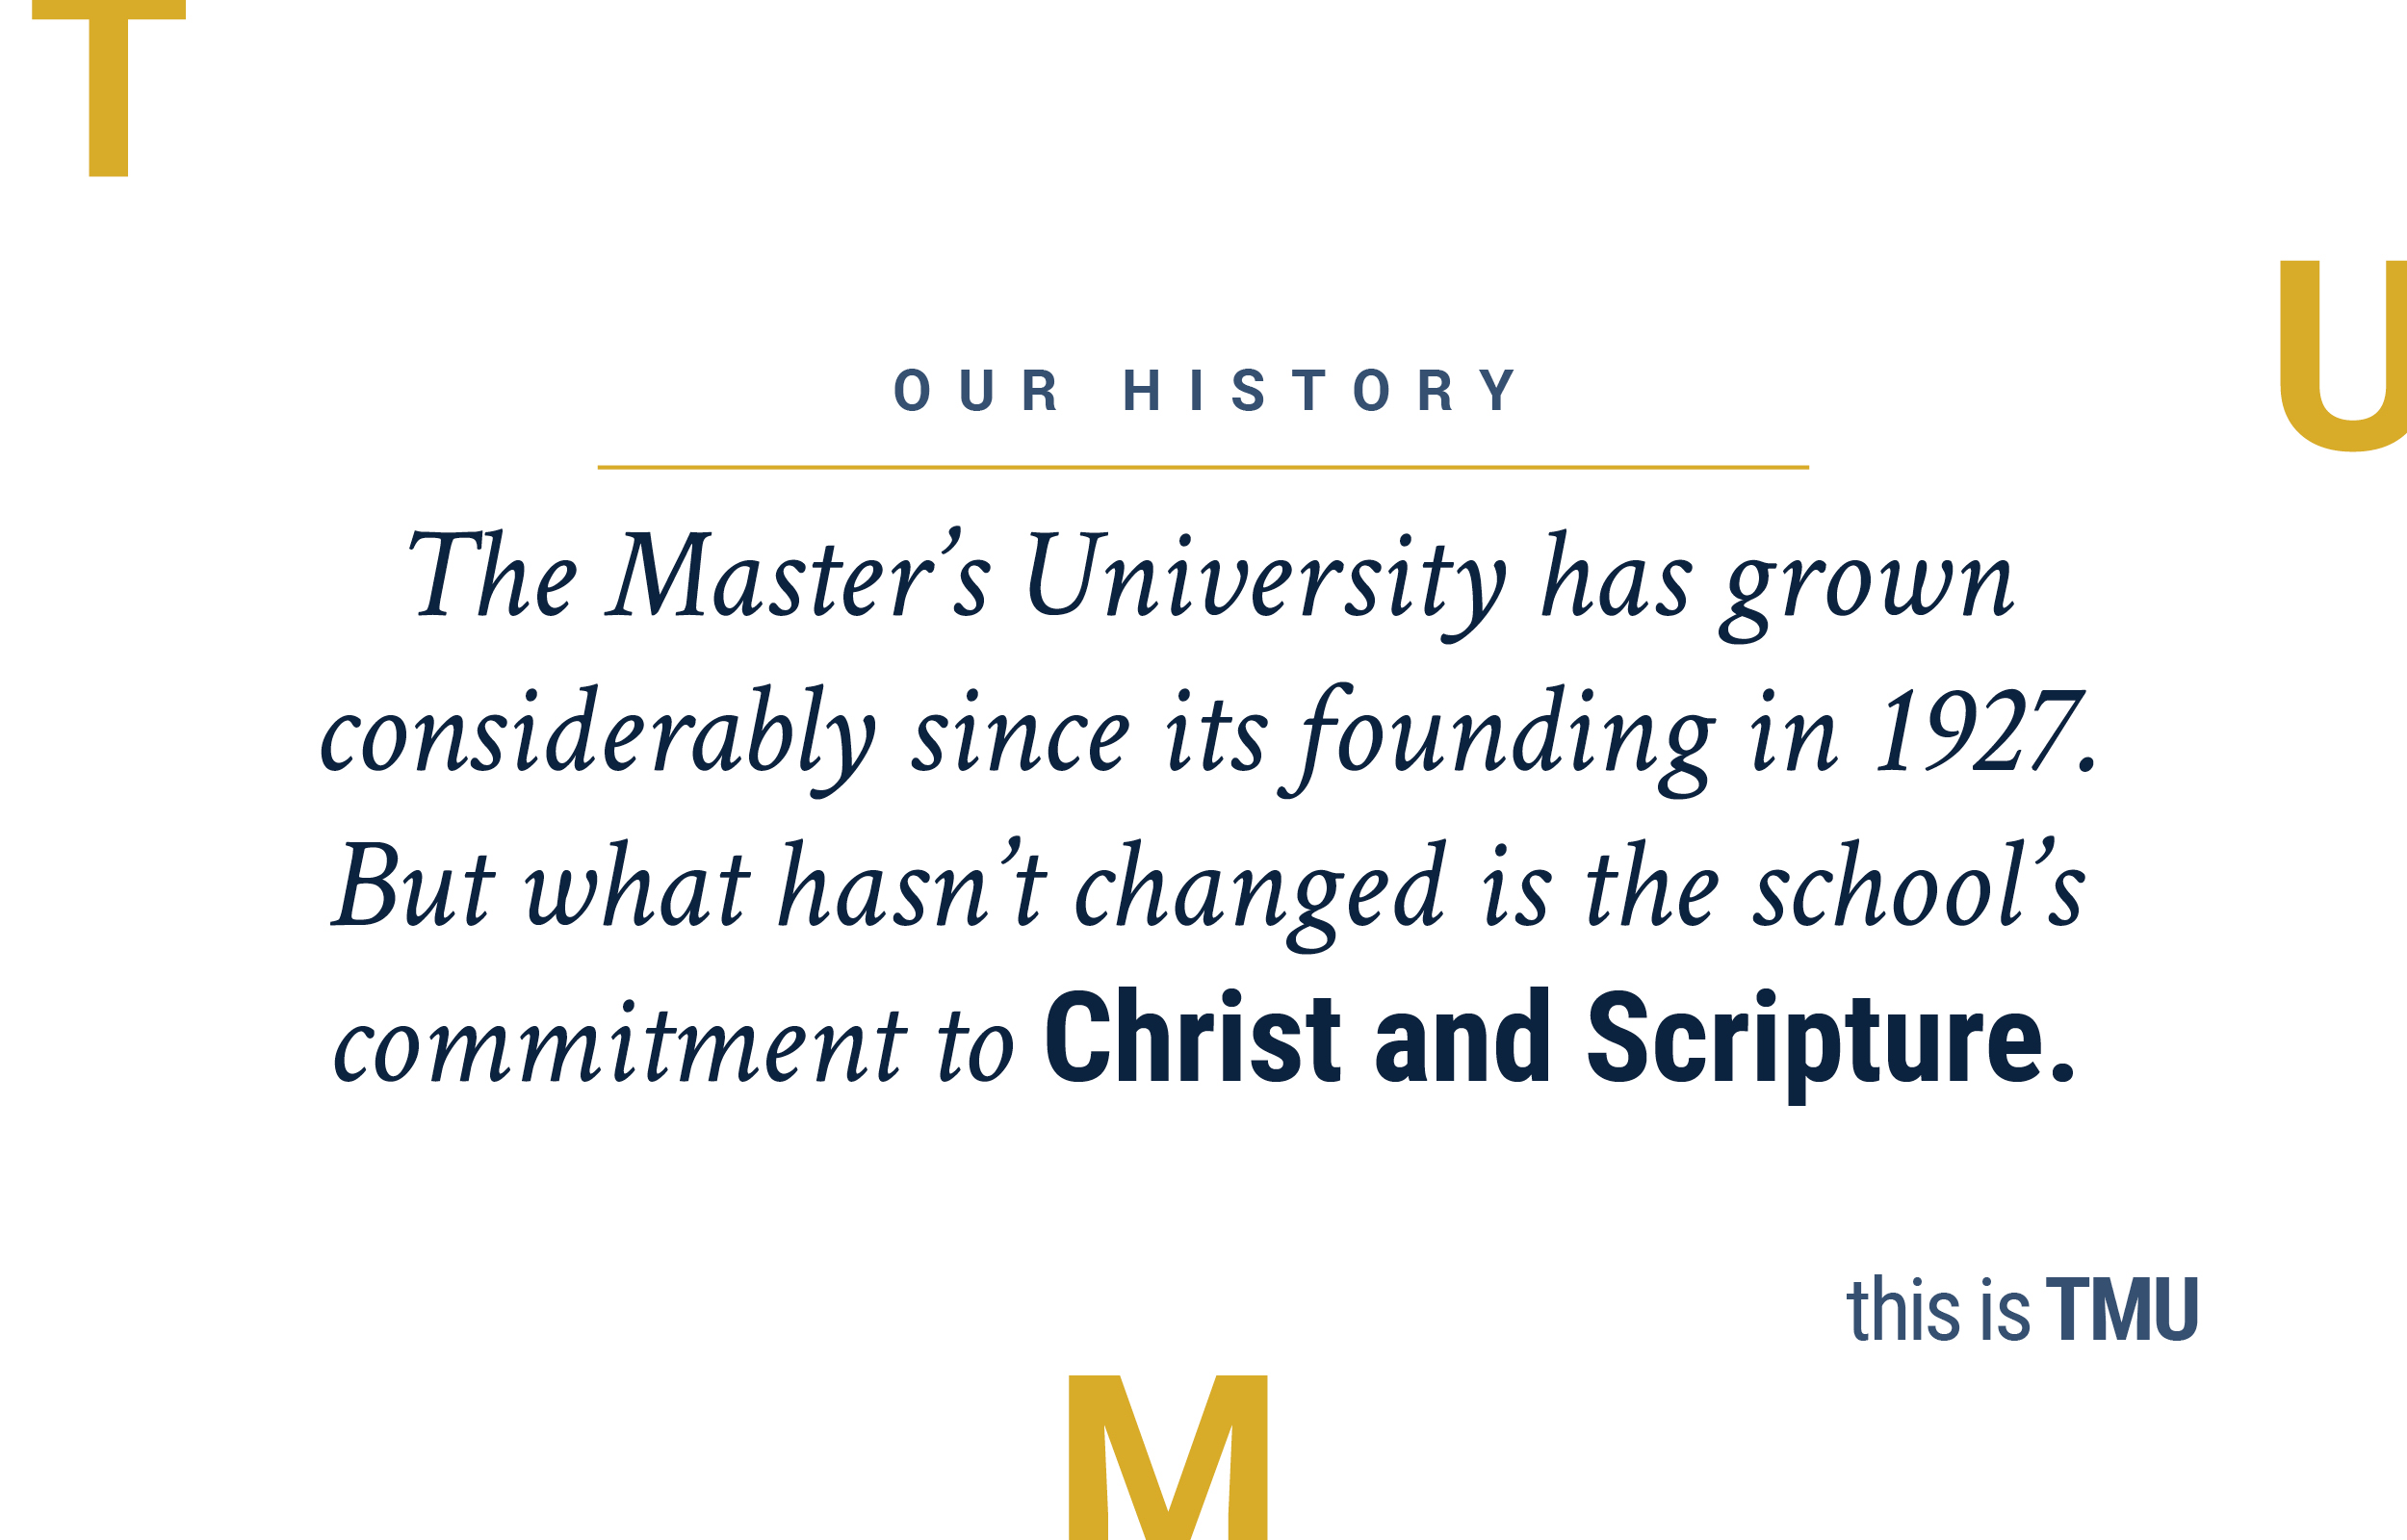 This is TMU: Our History image